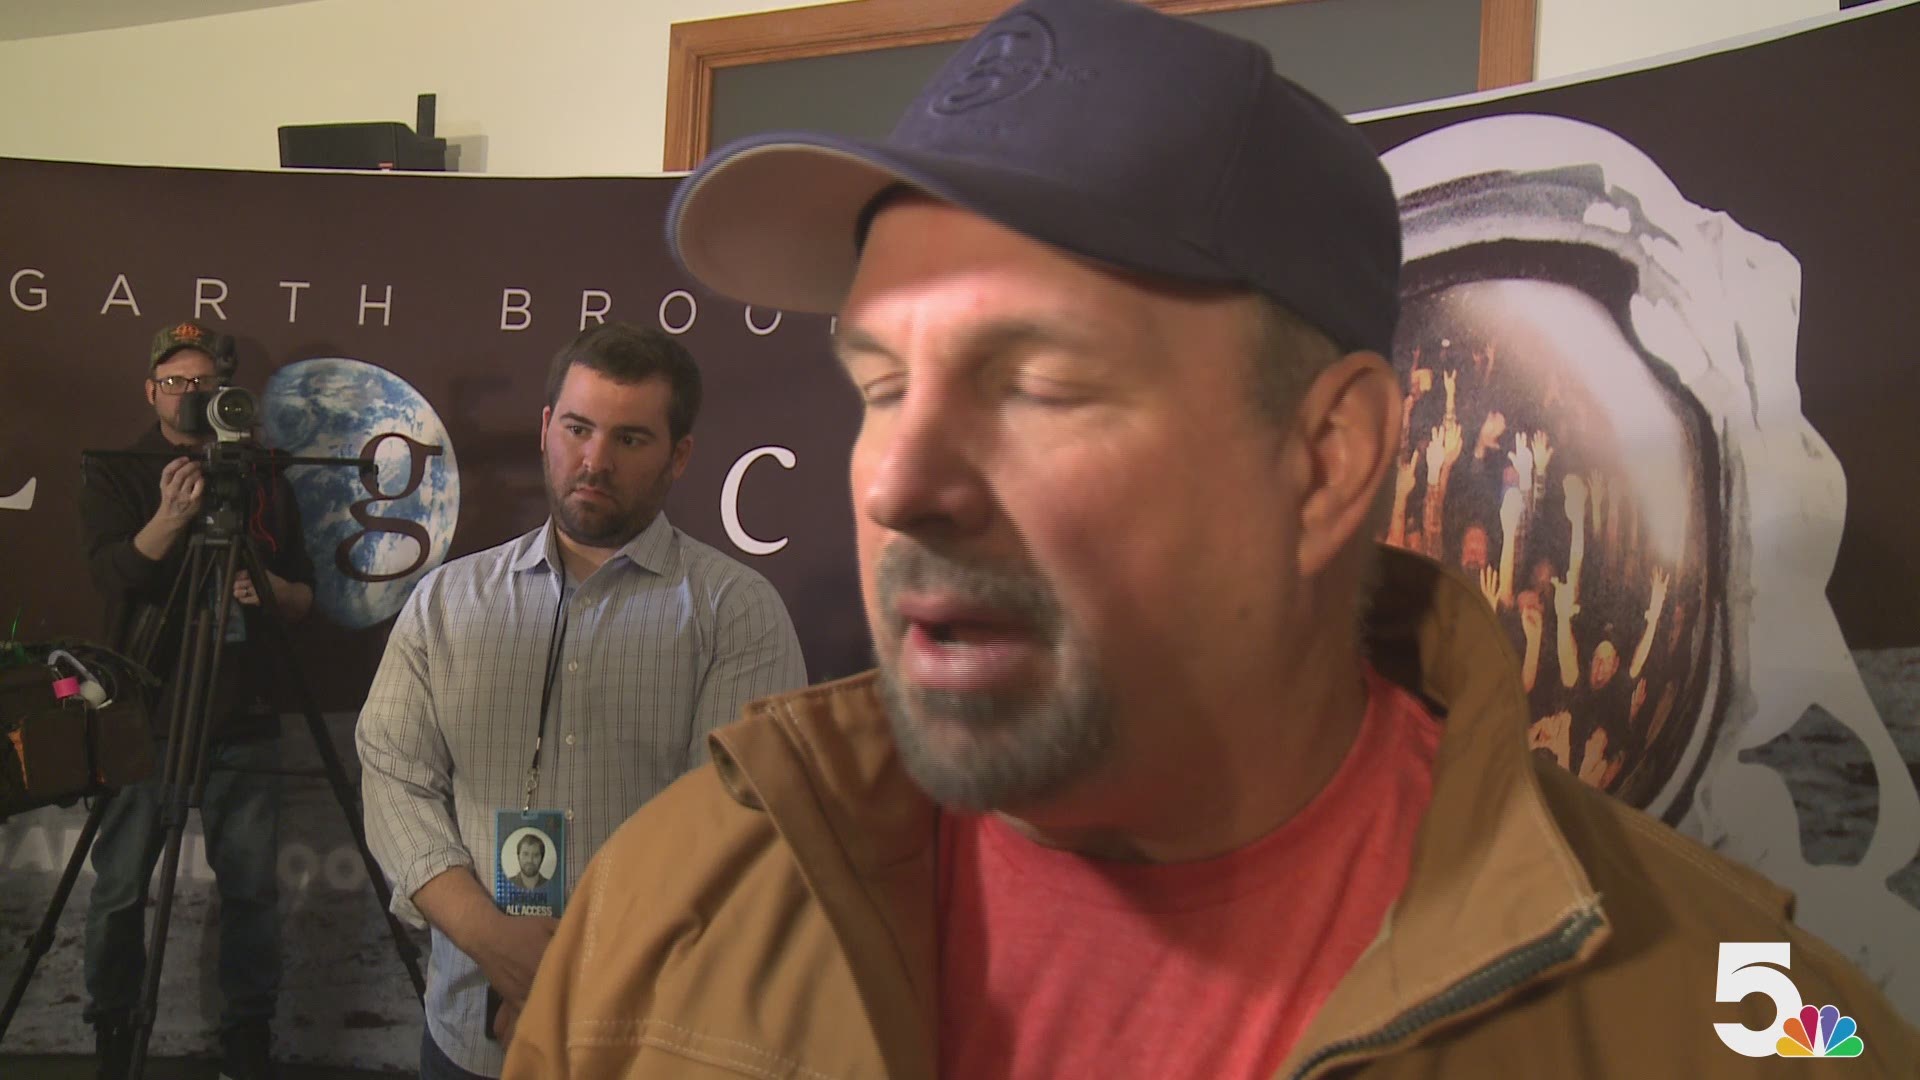 Garth Brooks stopped to chat with us for a bit before his sold out show on Saturday at the Dome.